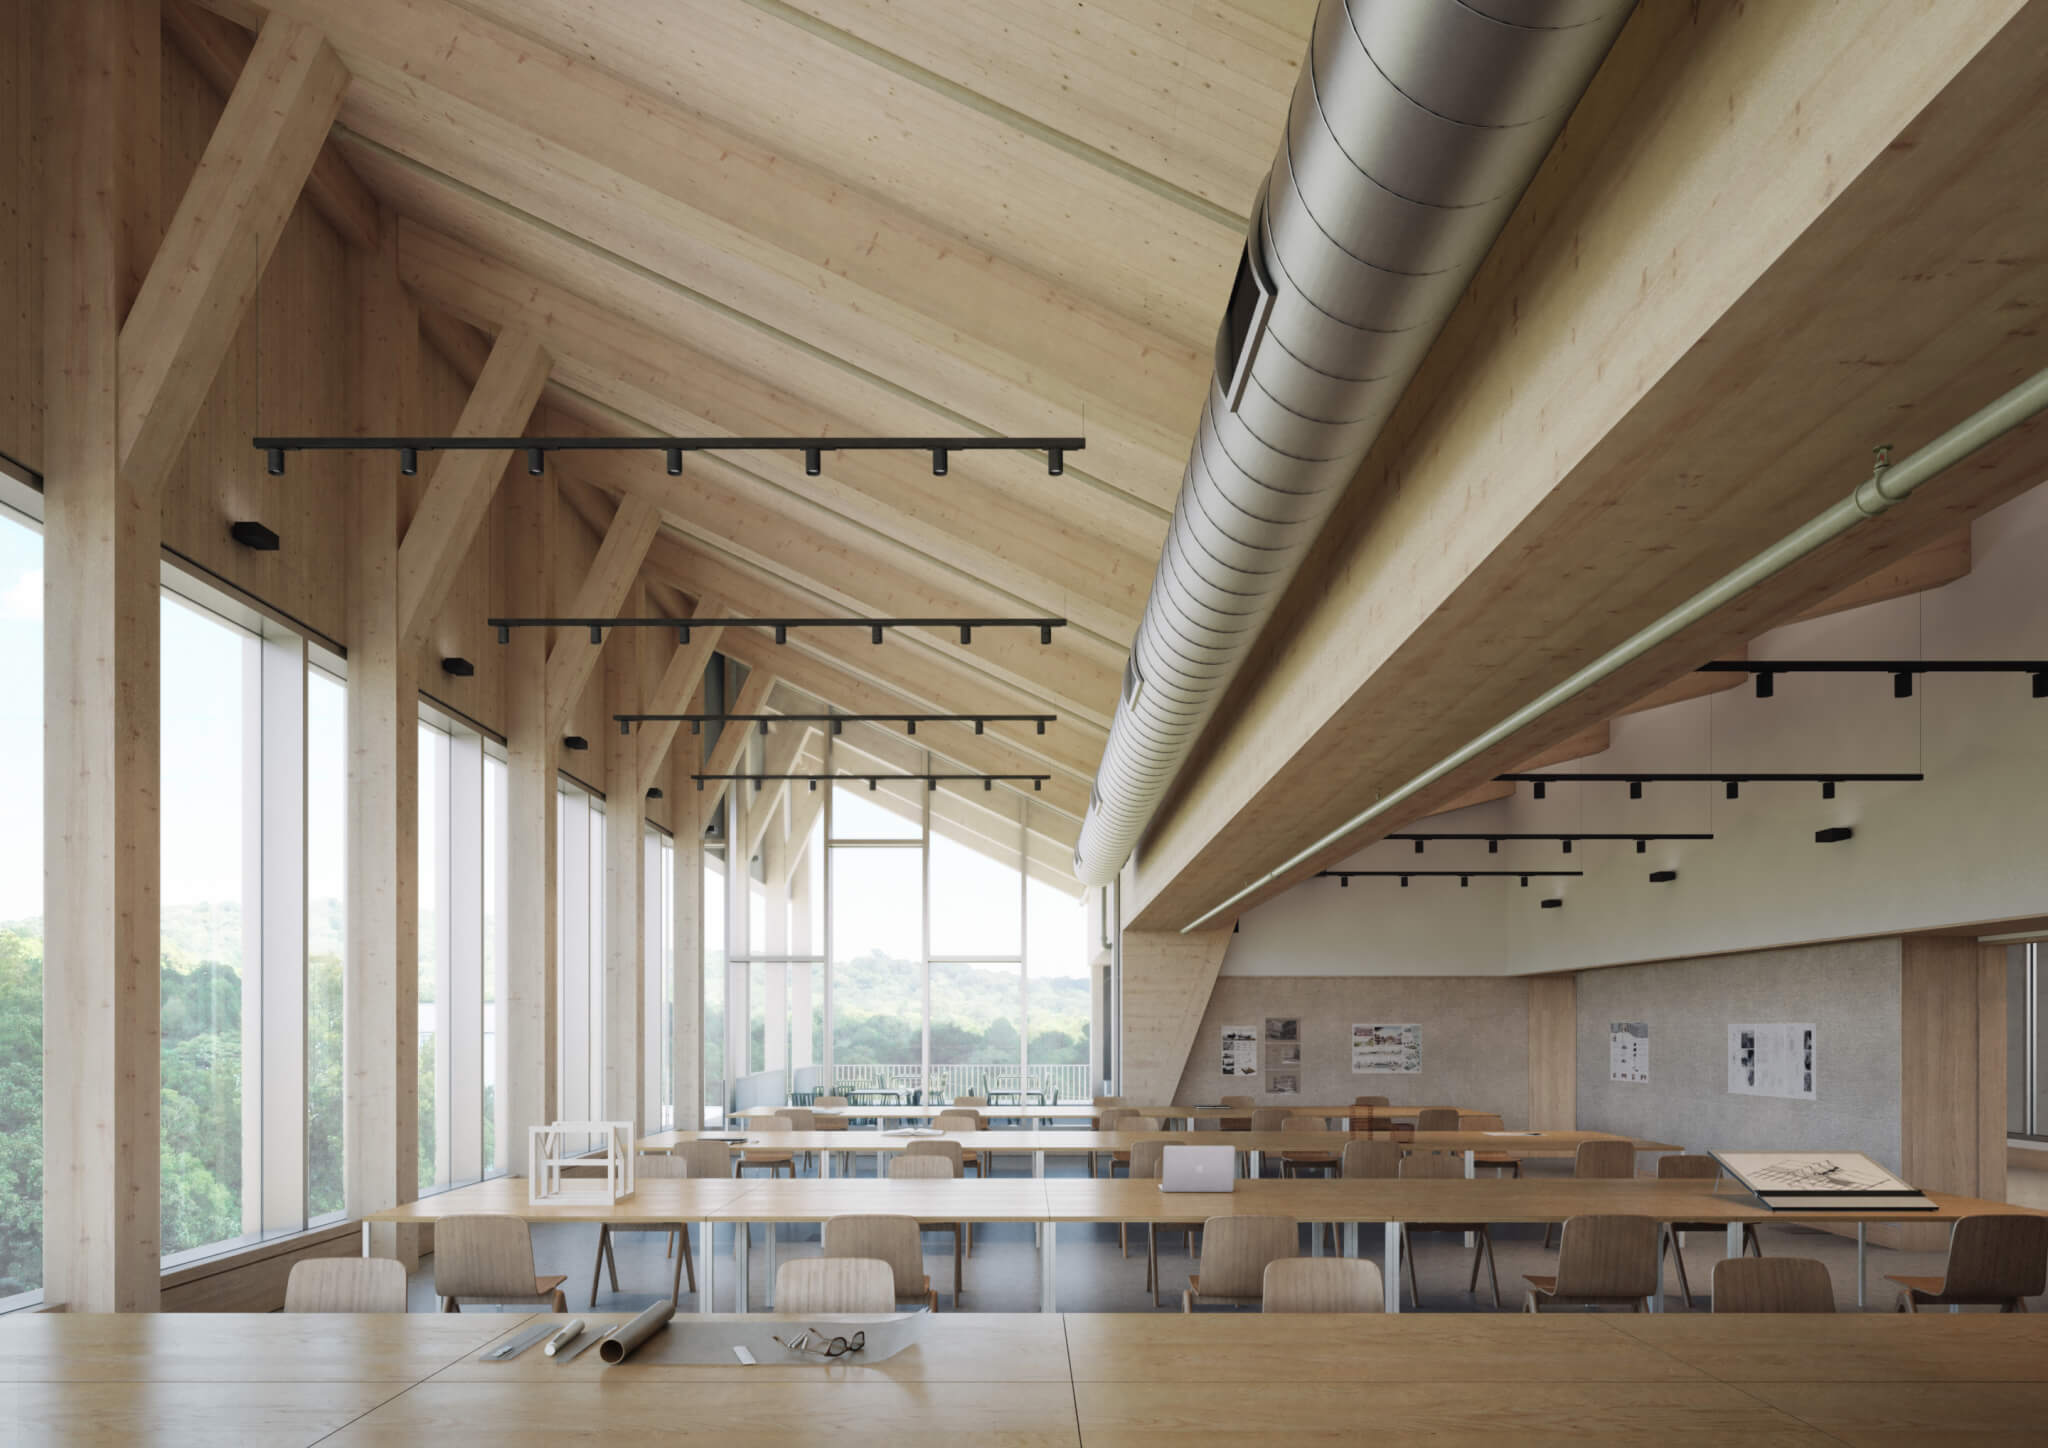 interior rendering of a mass timber classroom space